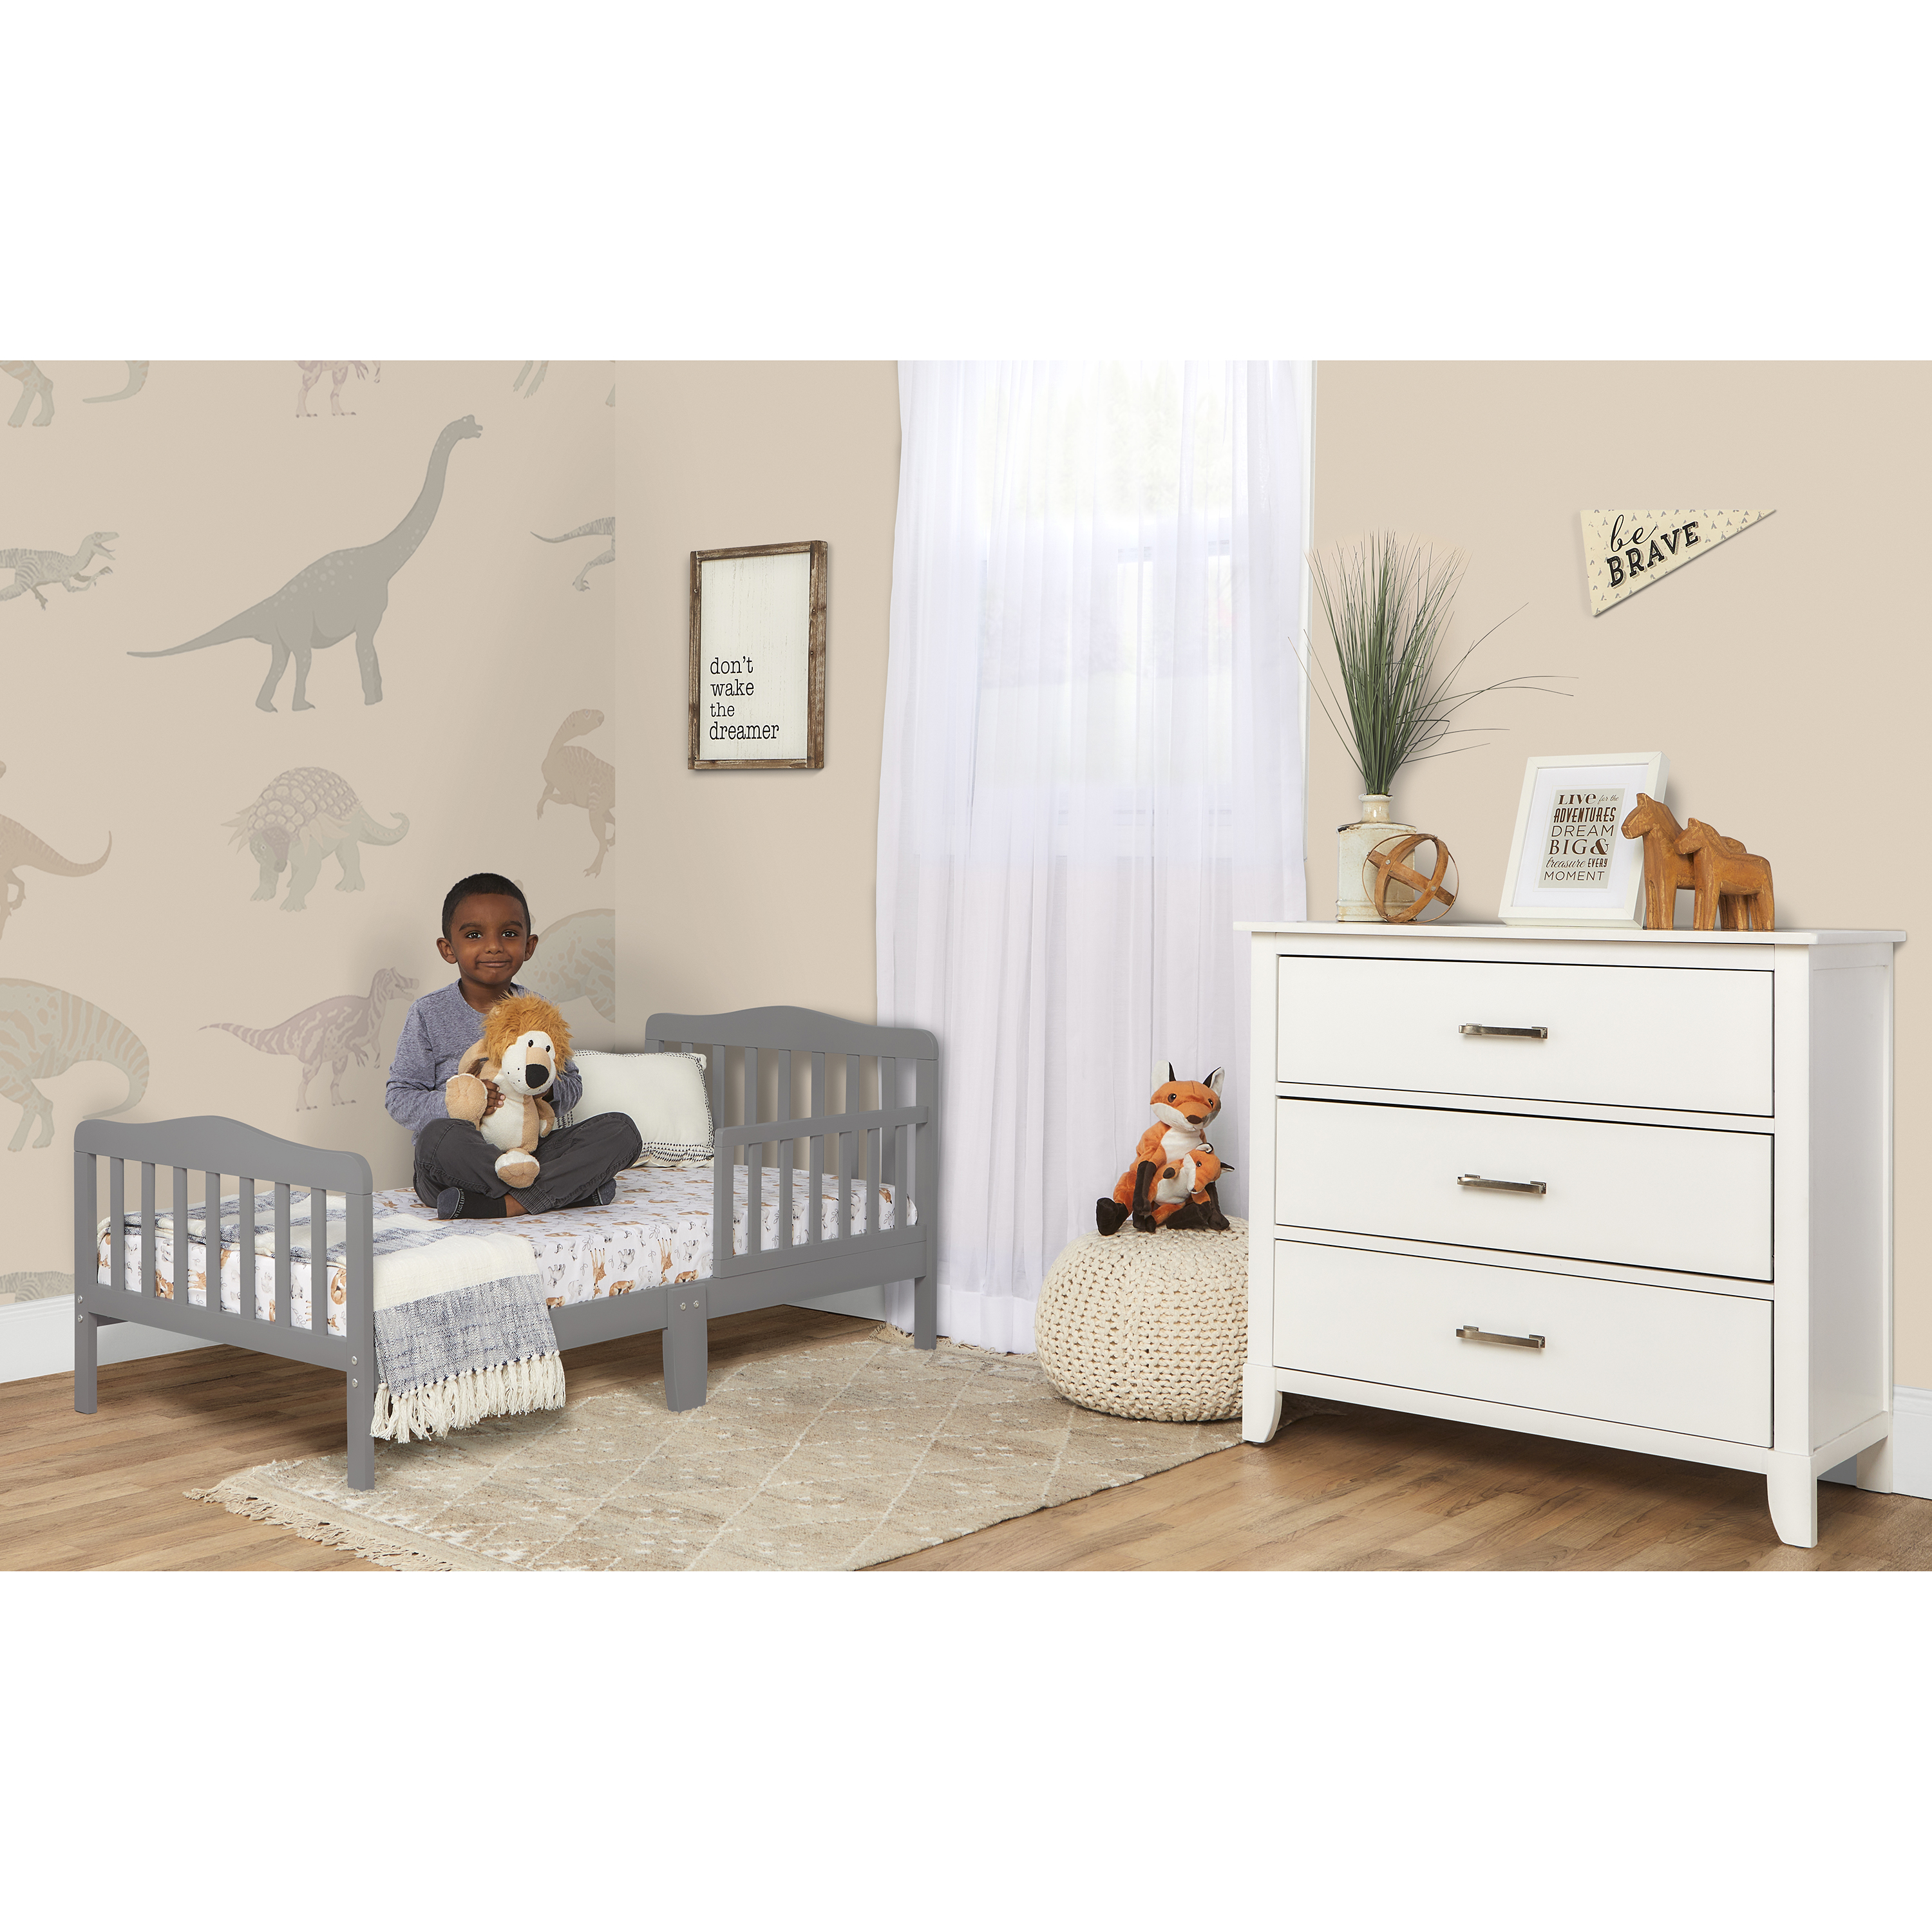 Dream On Me Classic Design Toddler Bed, Steel Grey - image 3 of 15